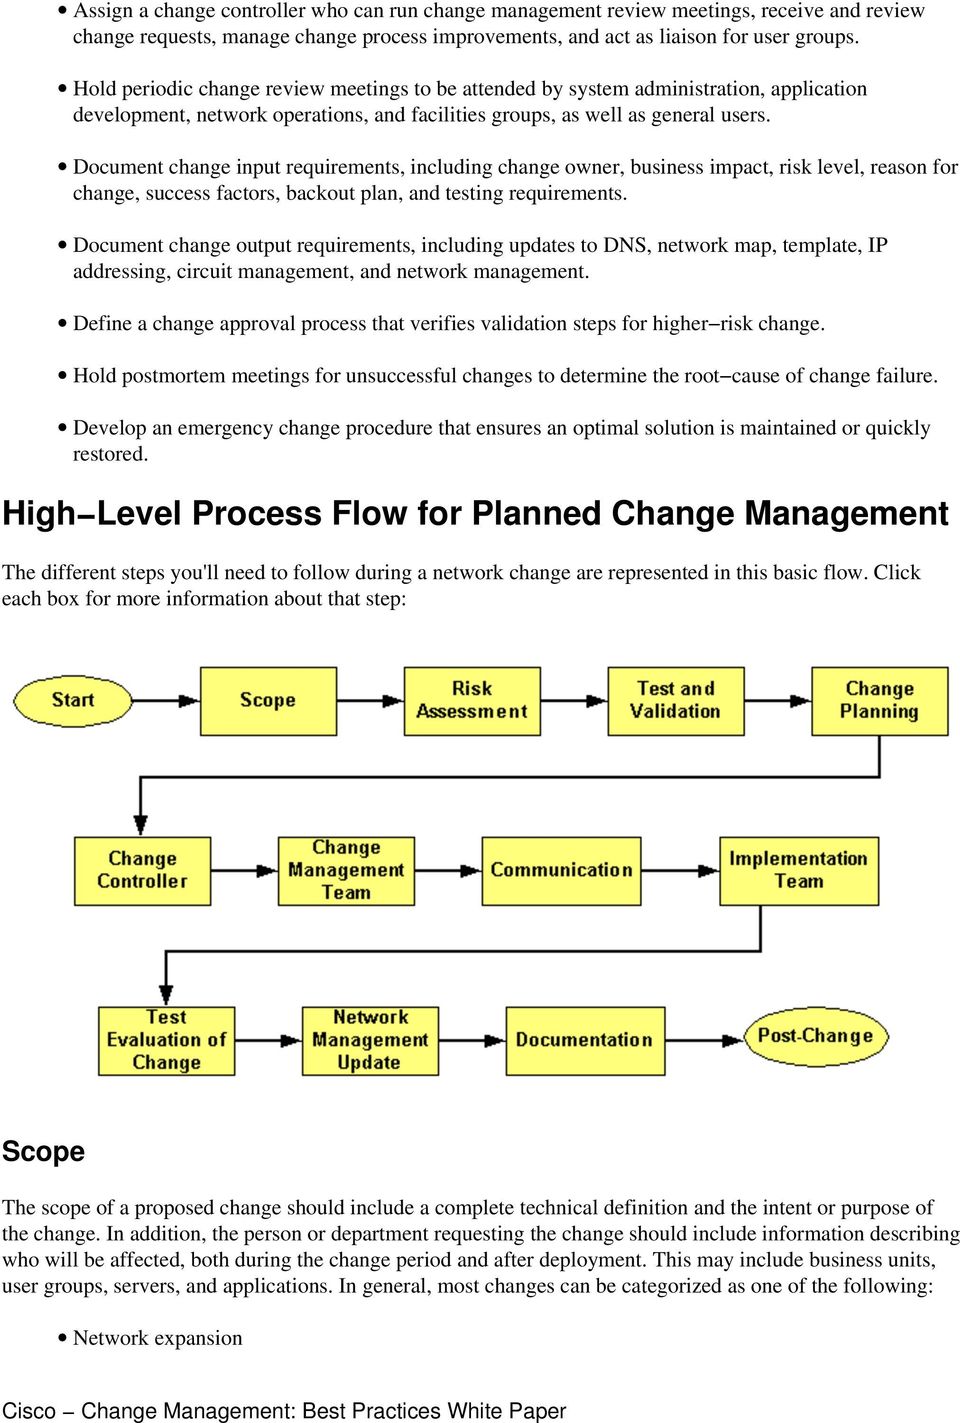 Document change input requirements, including change owner, business impact, risk level, reason for change, success factors, backout plan, and testing requirements.